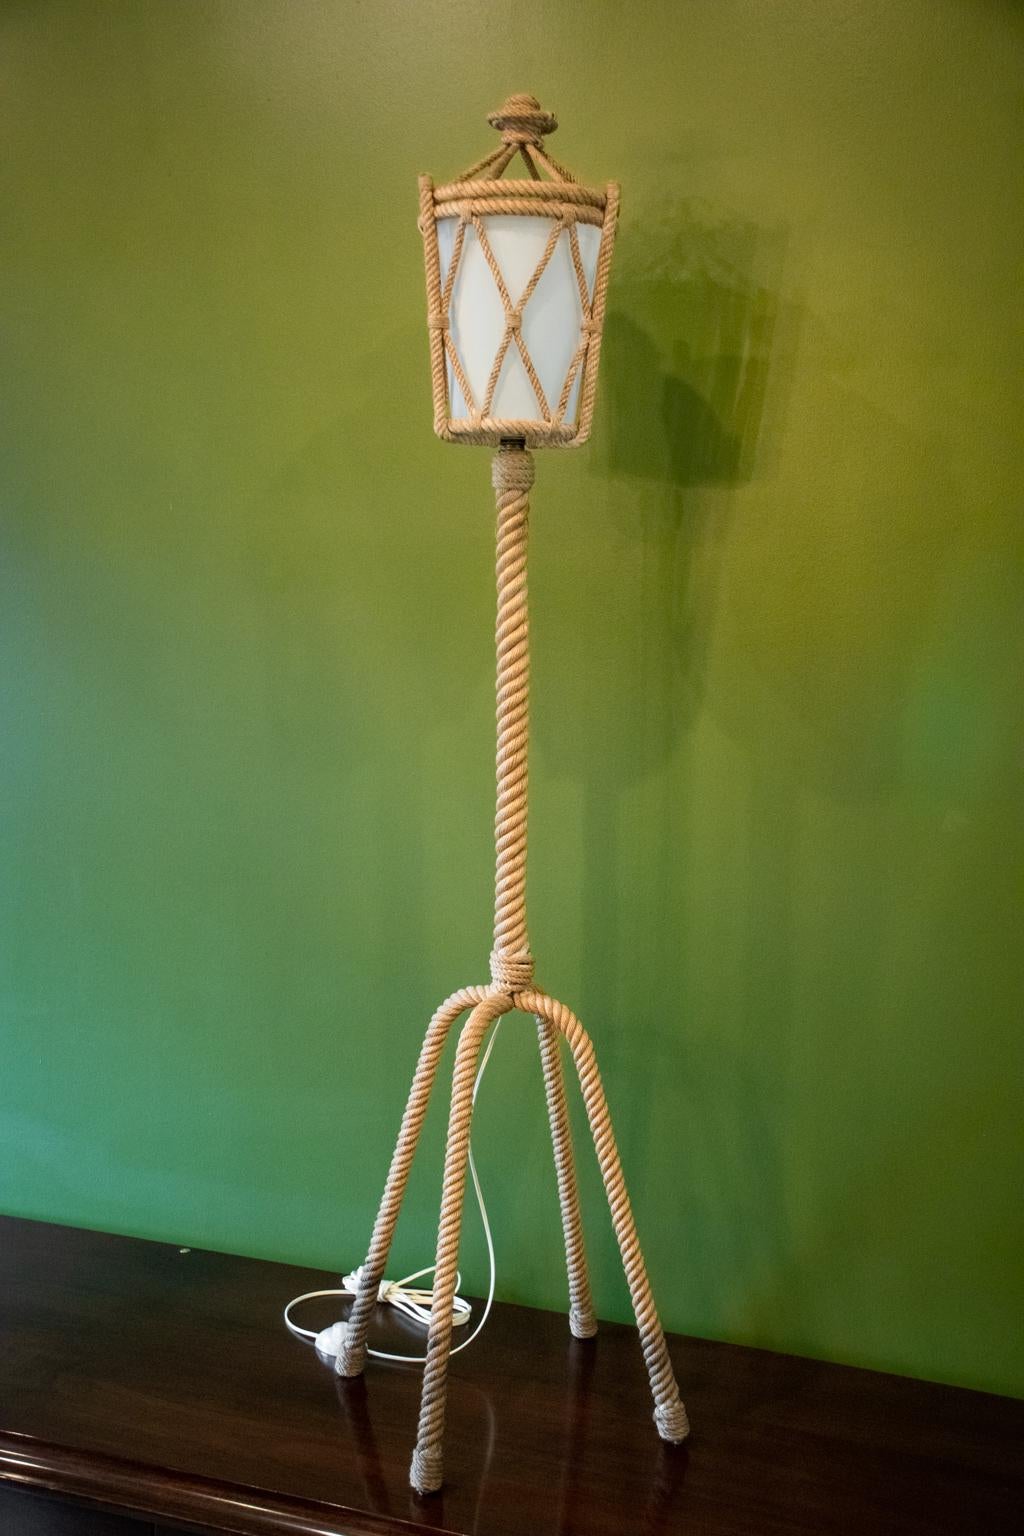 Iconic piece by famed mid-century design duo Adrien Audoux and Frida Minet. Floor lamp has four legs and lantern shaped top, wrapped in rope. Includes original rhodoid (synthetic-like thin plastic) liner at lantern. Has been newly rewired for US use